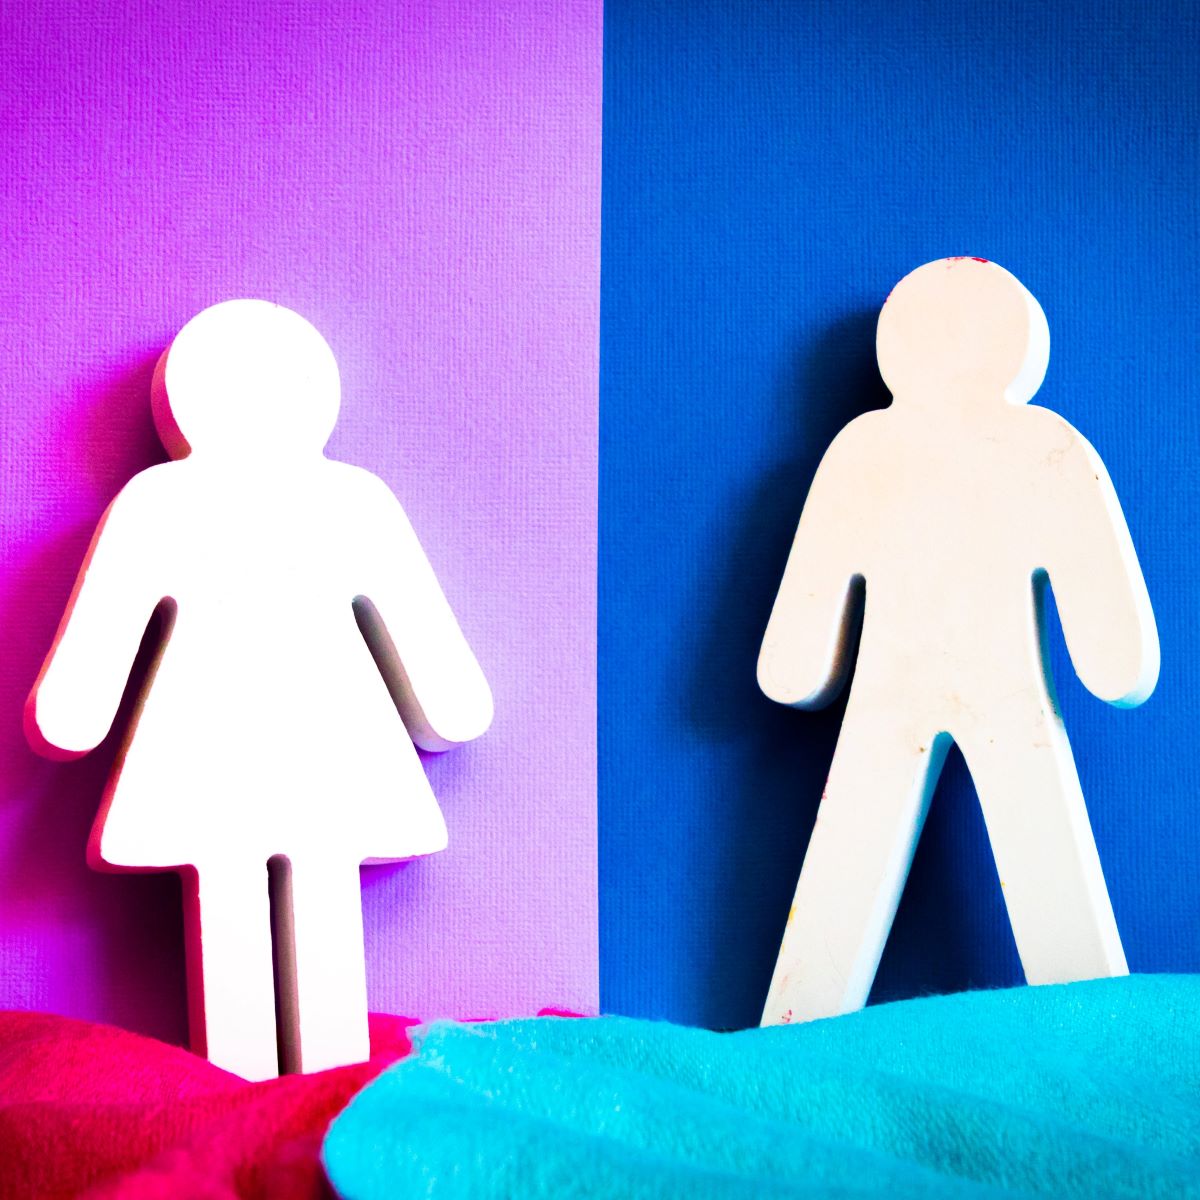 Why Gender Identity Matters in 2020 at the Chrysalis conference